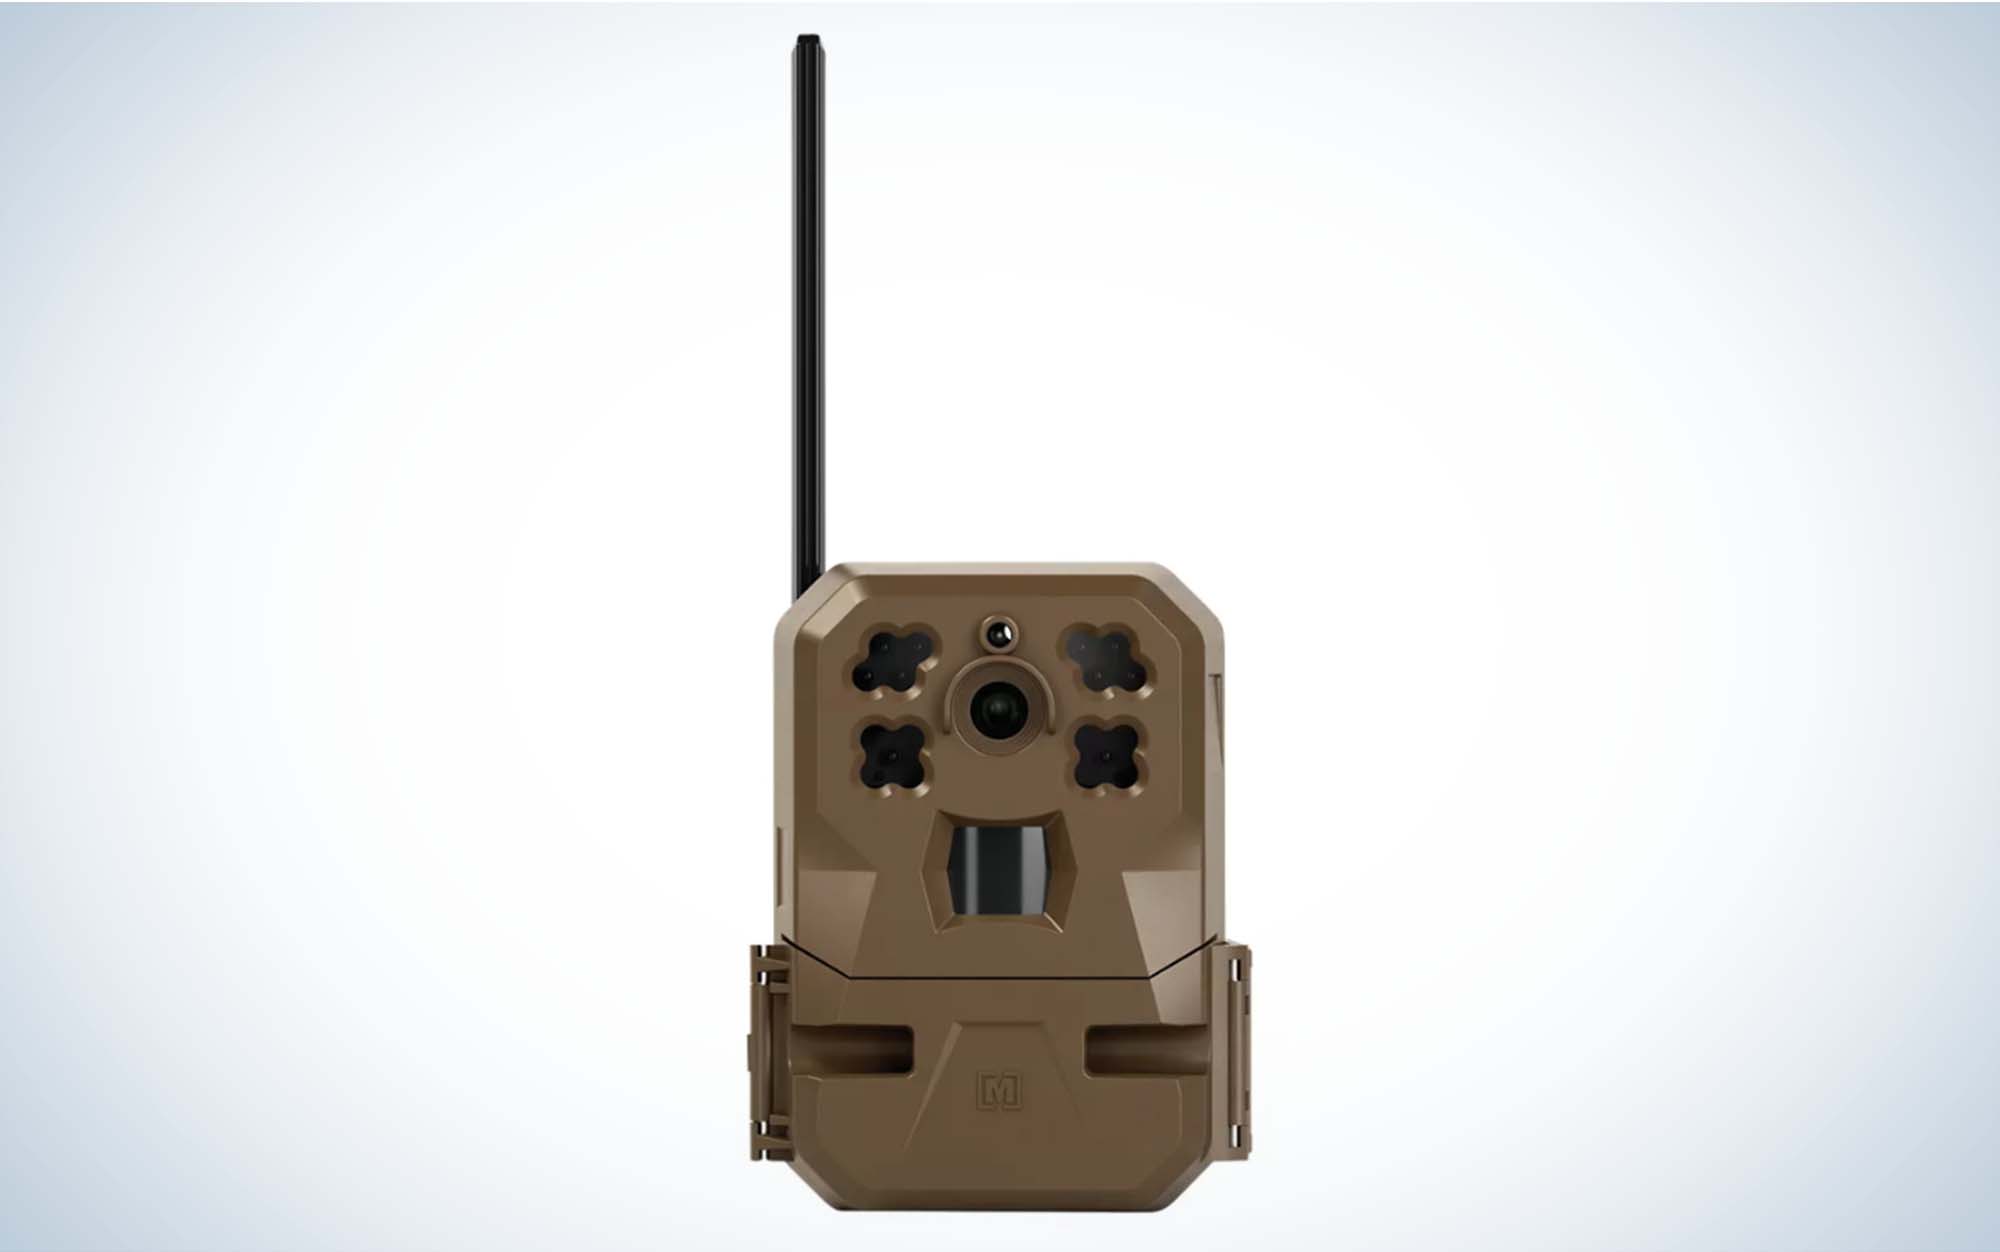 The Moultrie Edge is the best cellular trail camera.